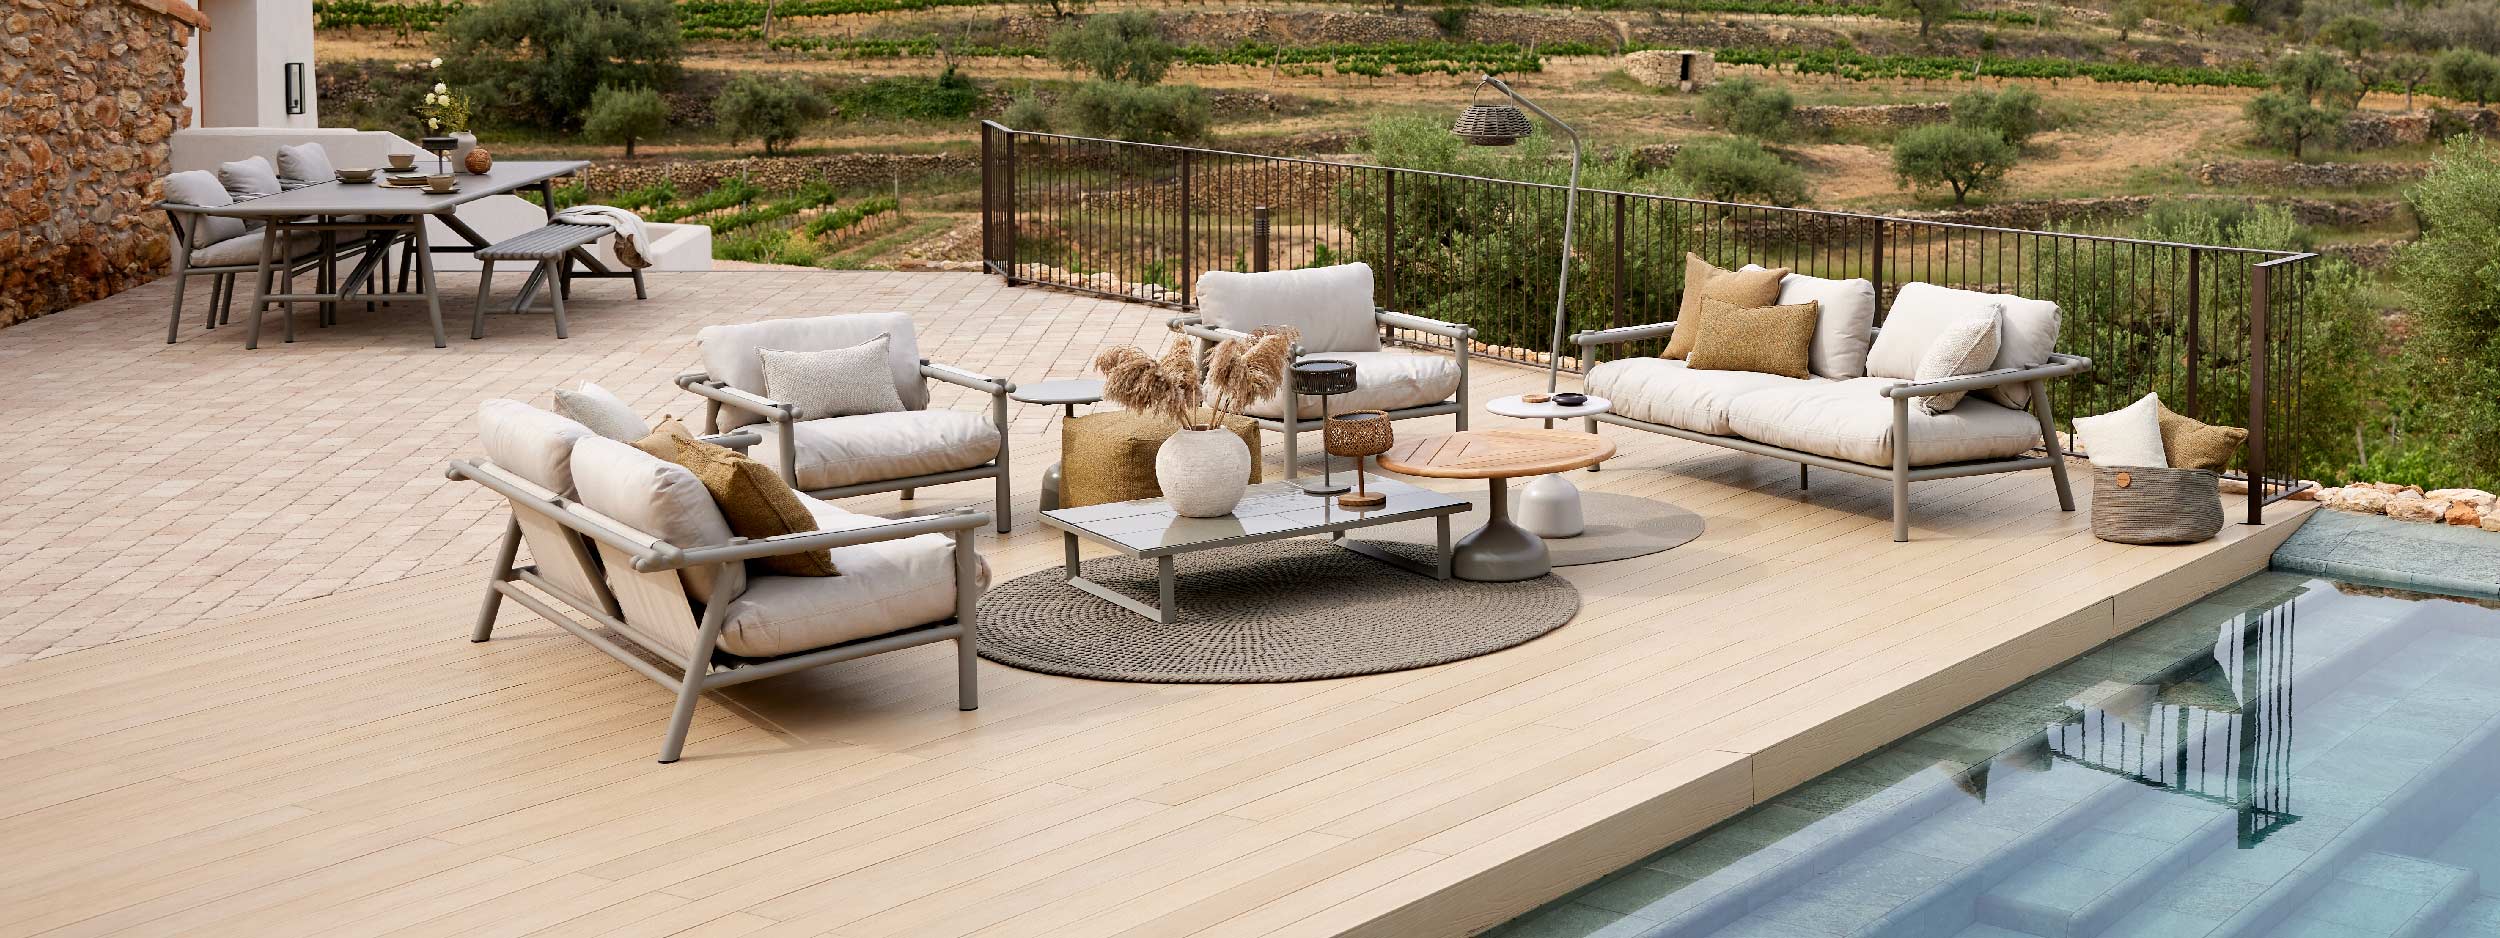 Image of Cane-line Sticks aluminium garden sofas and lounge chairs, with Sticks modern dining furniture in the background